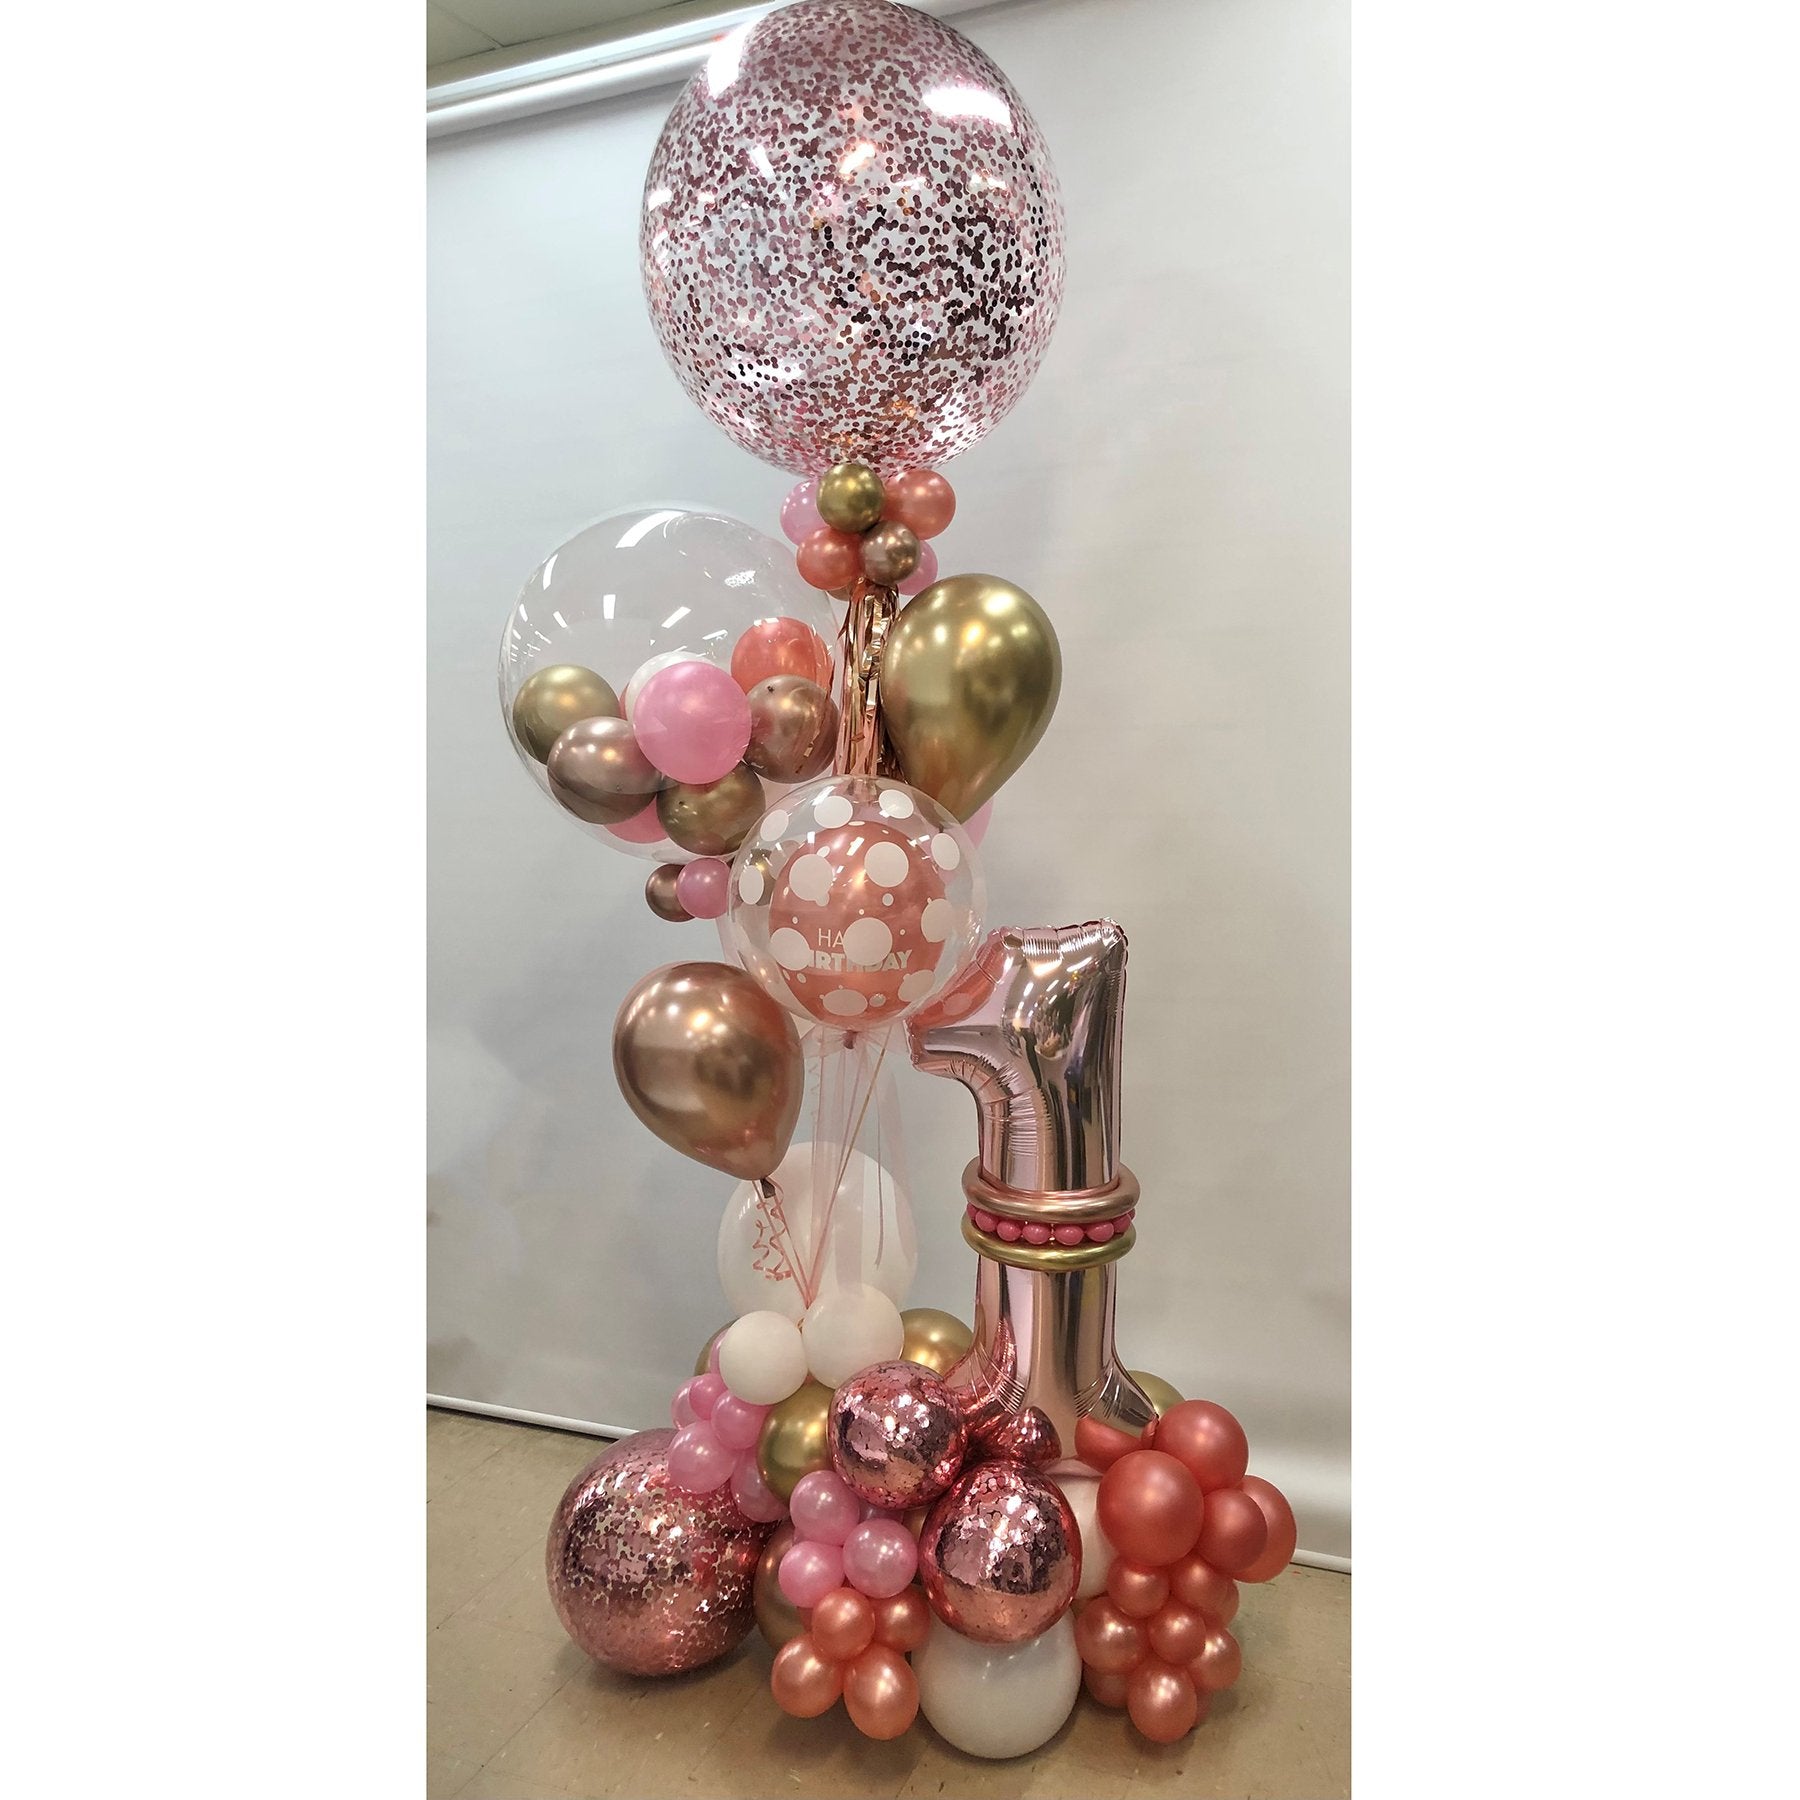 Balloon Bouquet When You're The One